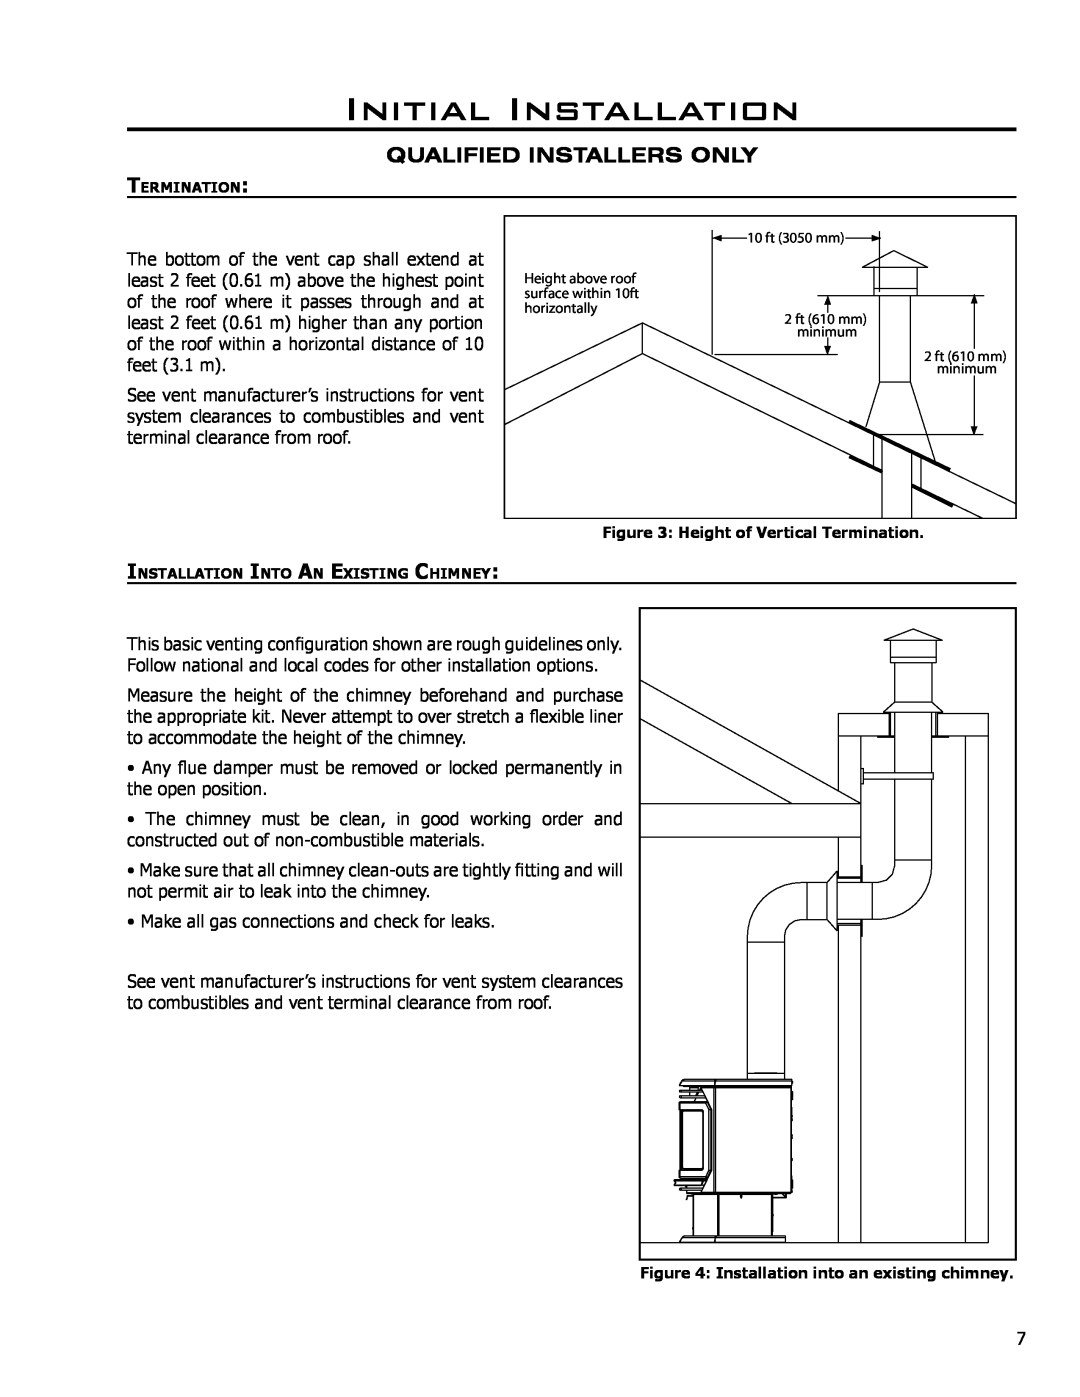 Enviro EG40 BV owner manual Initial Installation, Qualified Installers Only, Make all gas connections and check for leaks 